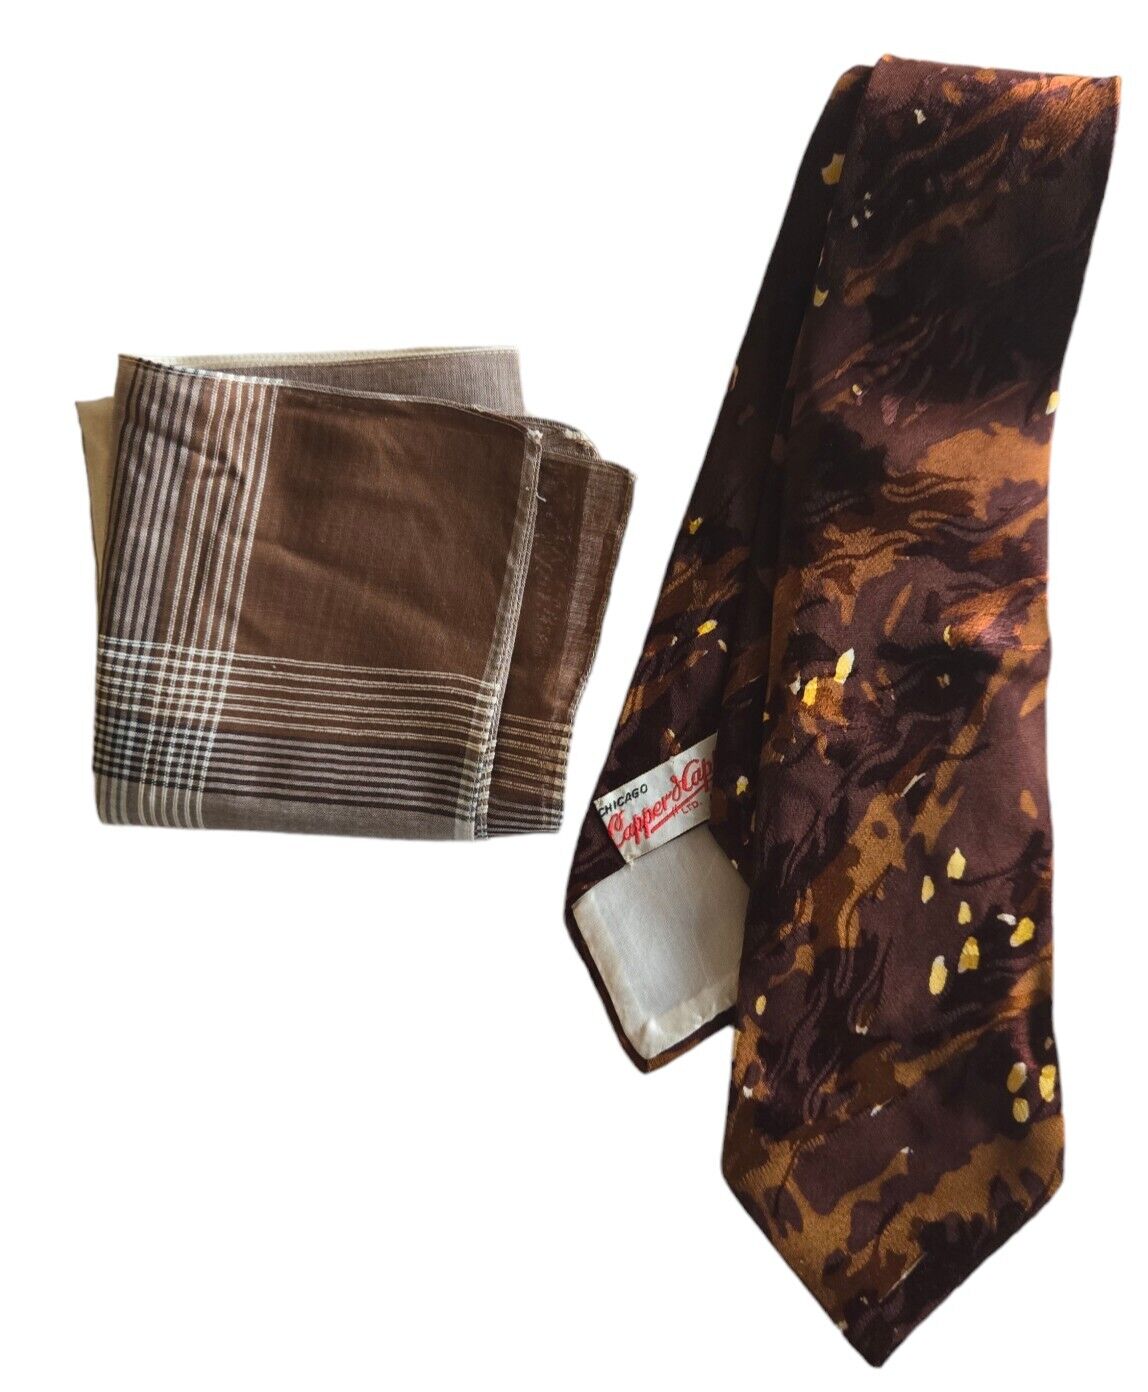 Al Capone Gang Member SAM COSTELLO Personally Owned & Worn Tie and Handkerchief